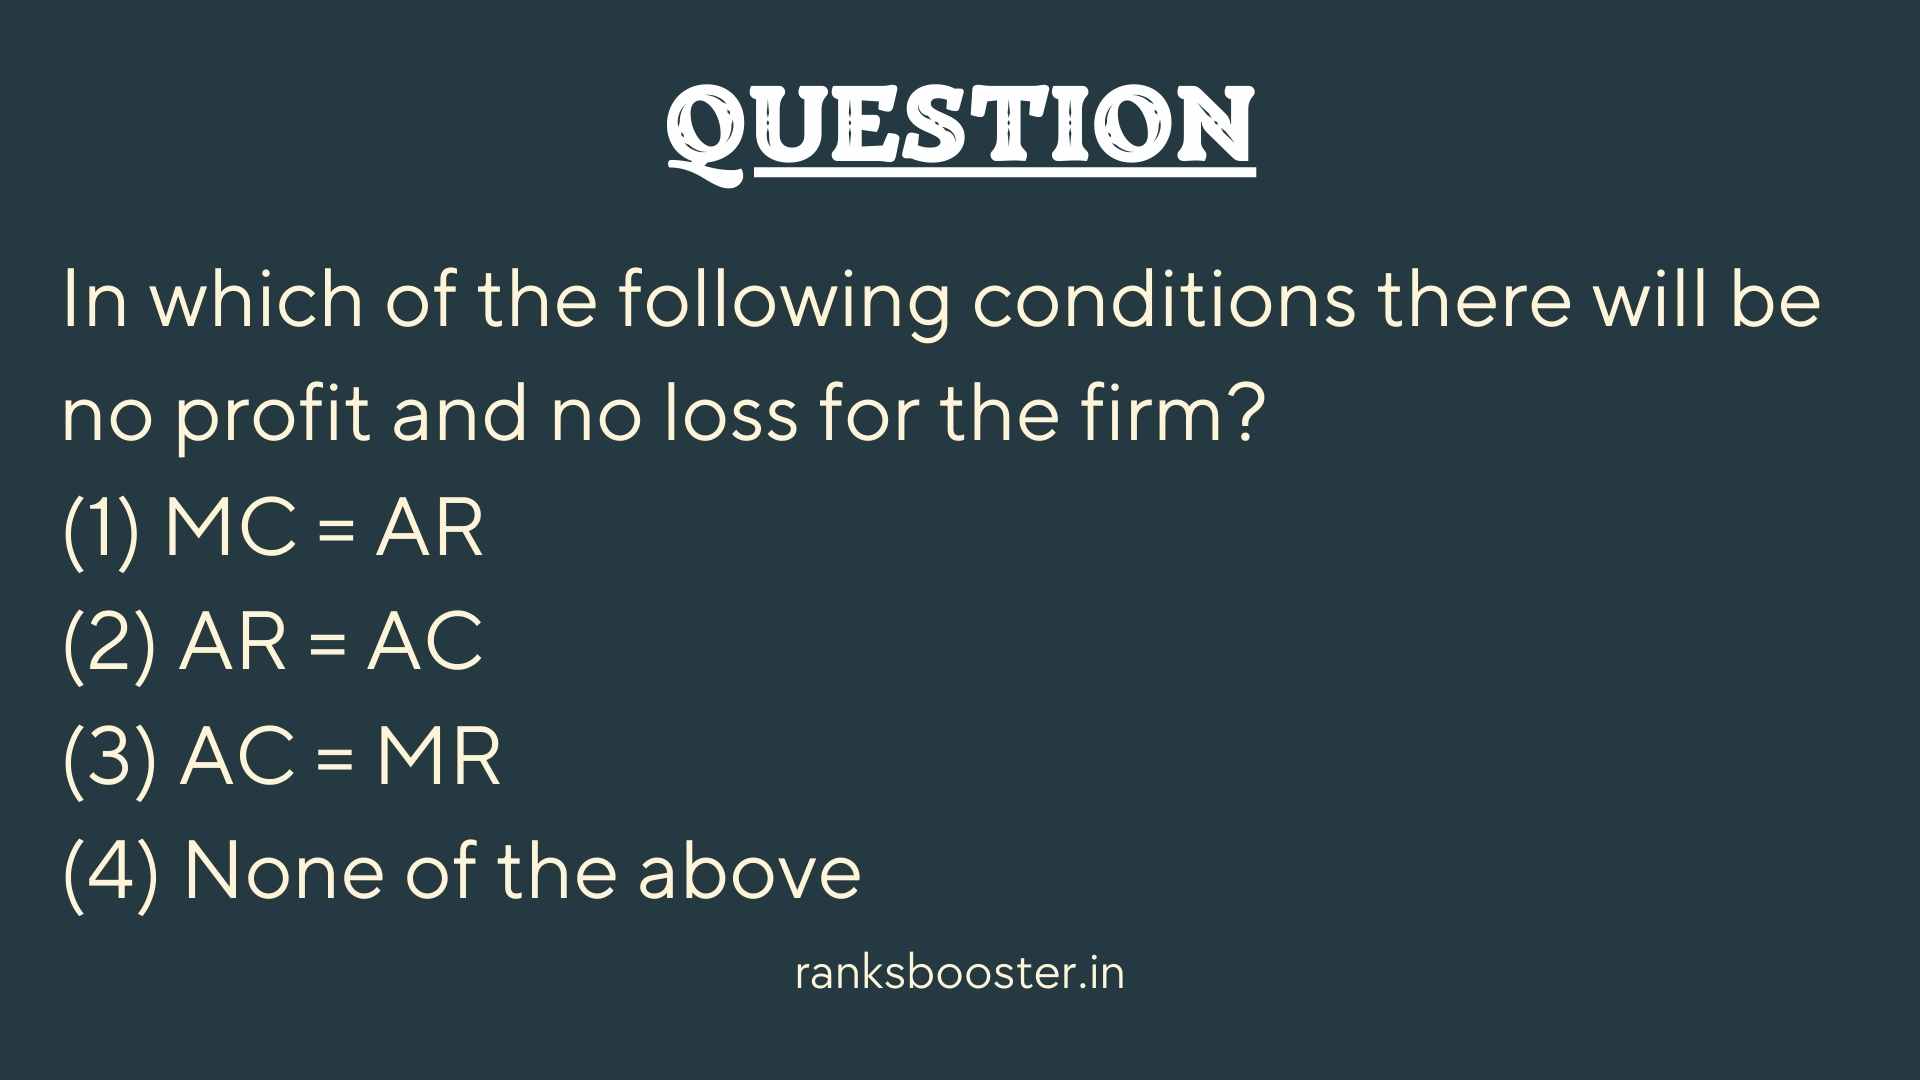 In which of the following conditions there will be no profit and no loss for the firm?